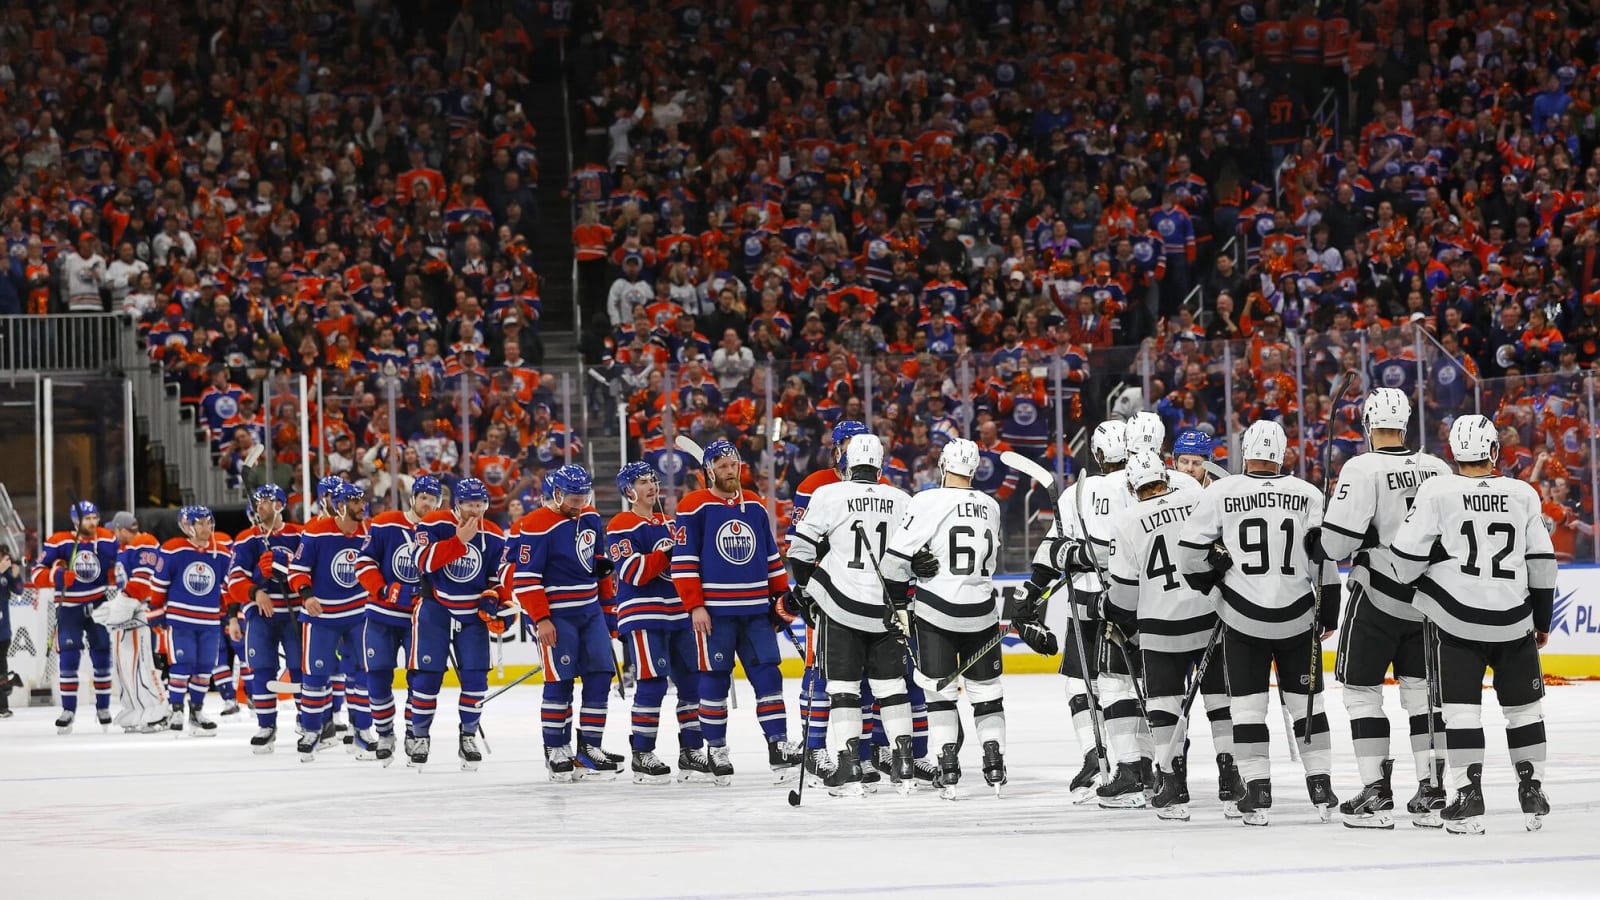 Every year the series gets shorter, Oilers send the Kings home in Game 5